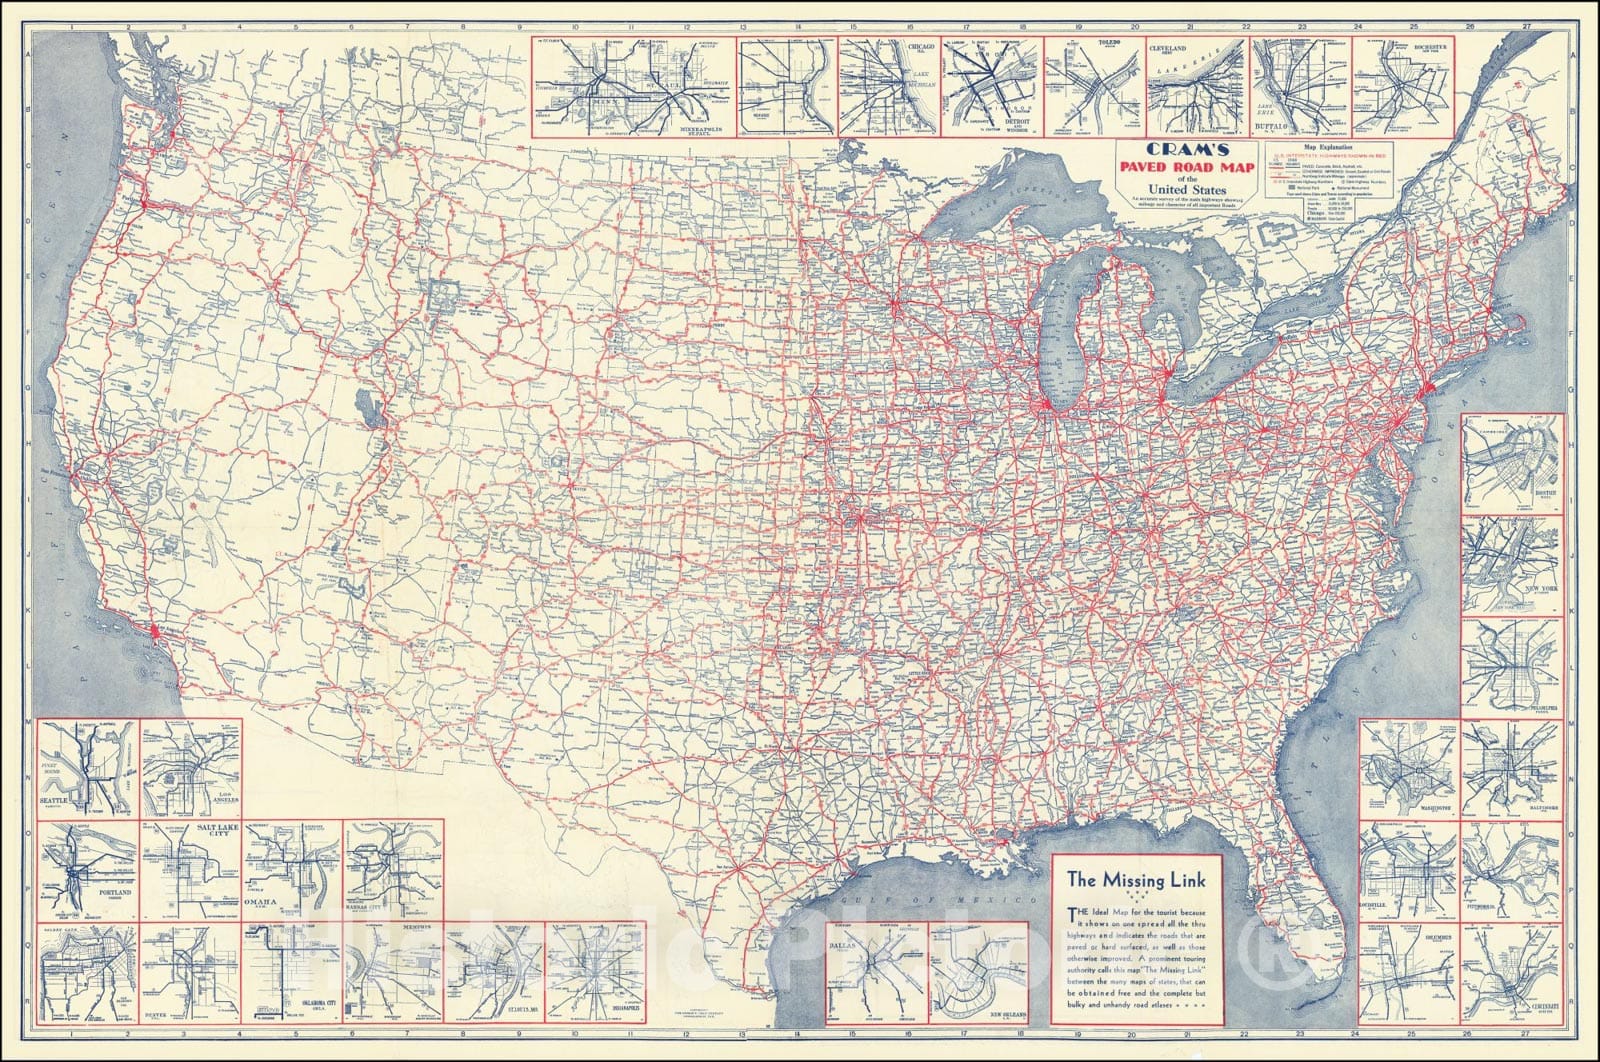 Historic Map : Cram's Paved Road United StatesAn accurate survey of the main highways showing mileage and character of all important Roads, 1930, Vintage Wall Art